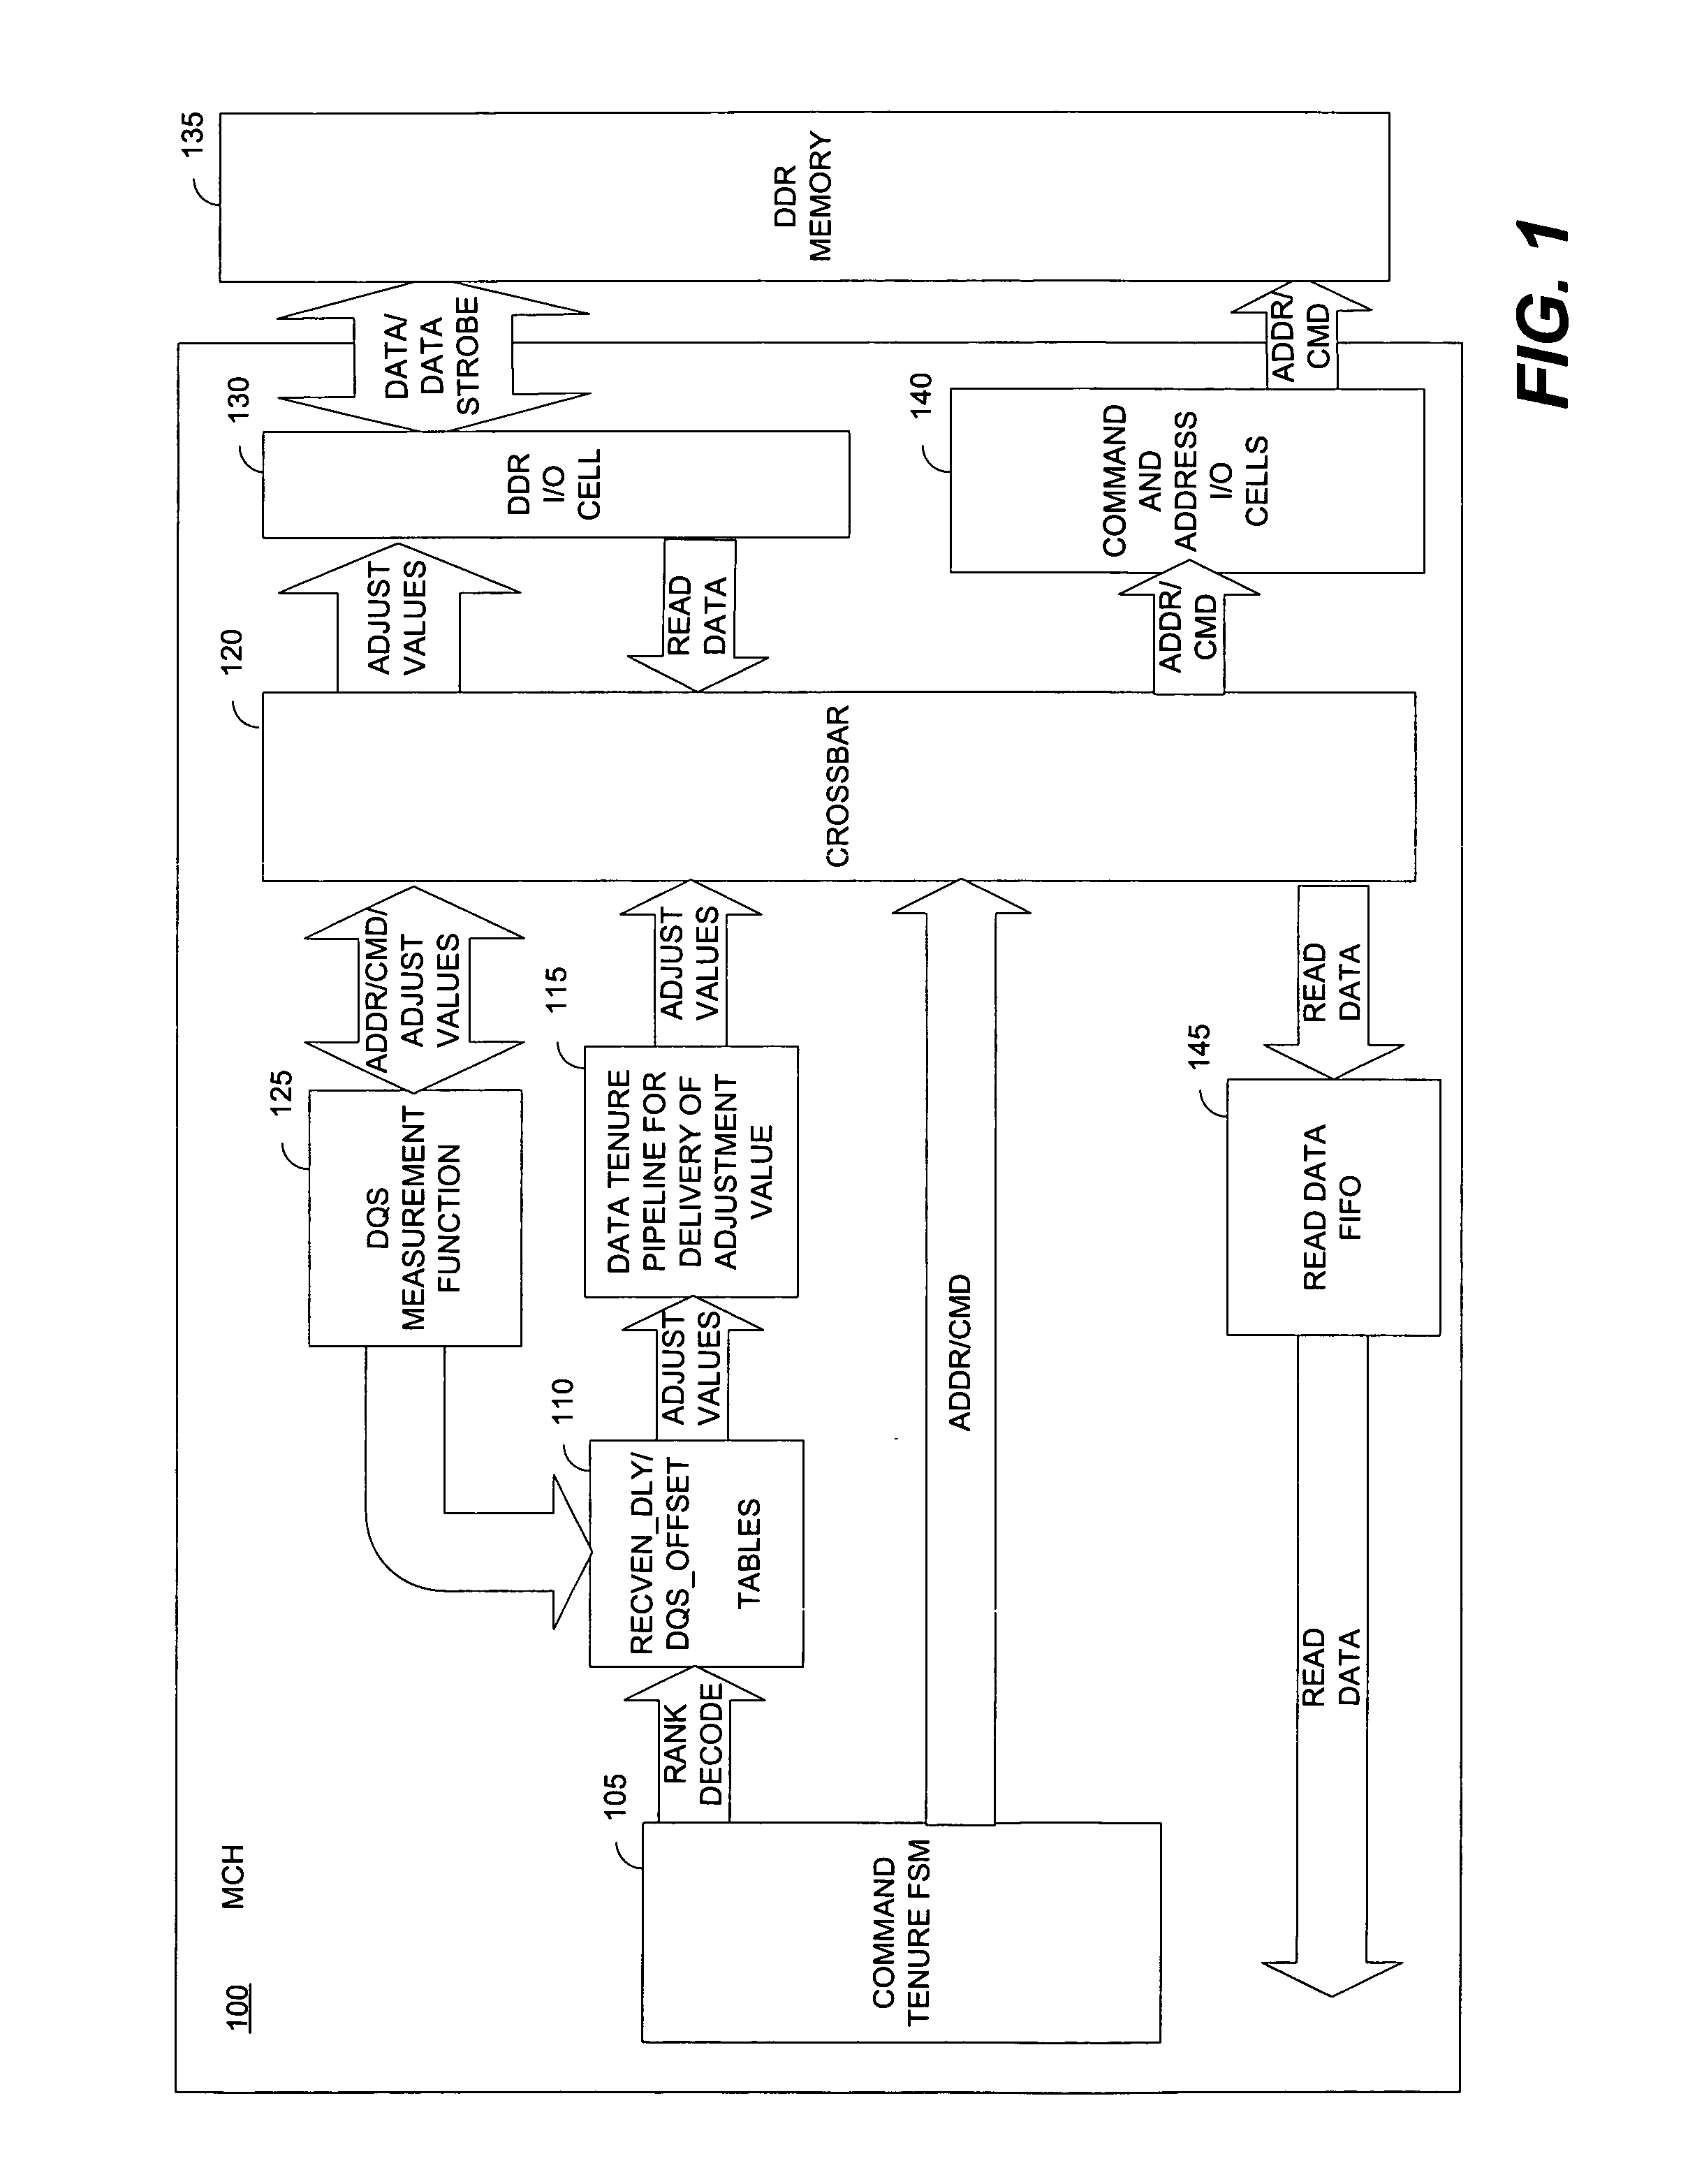 System and method for dynamic rank specific timing adjustments for double data rate (DDR) components